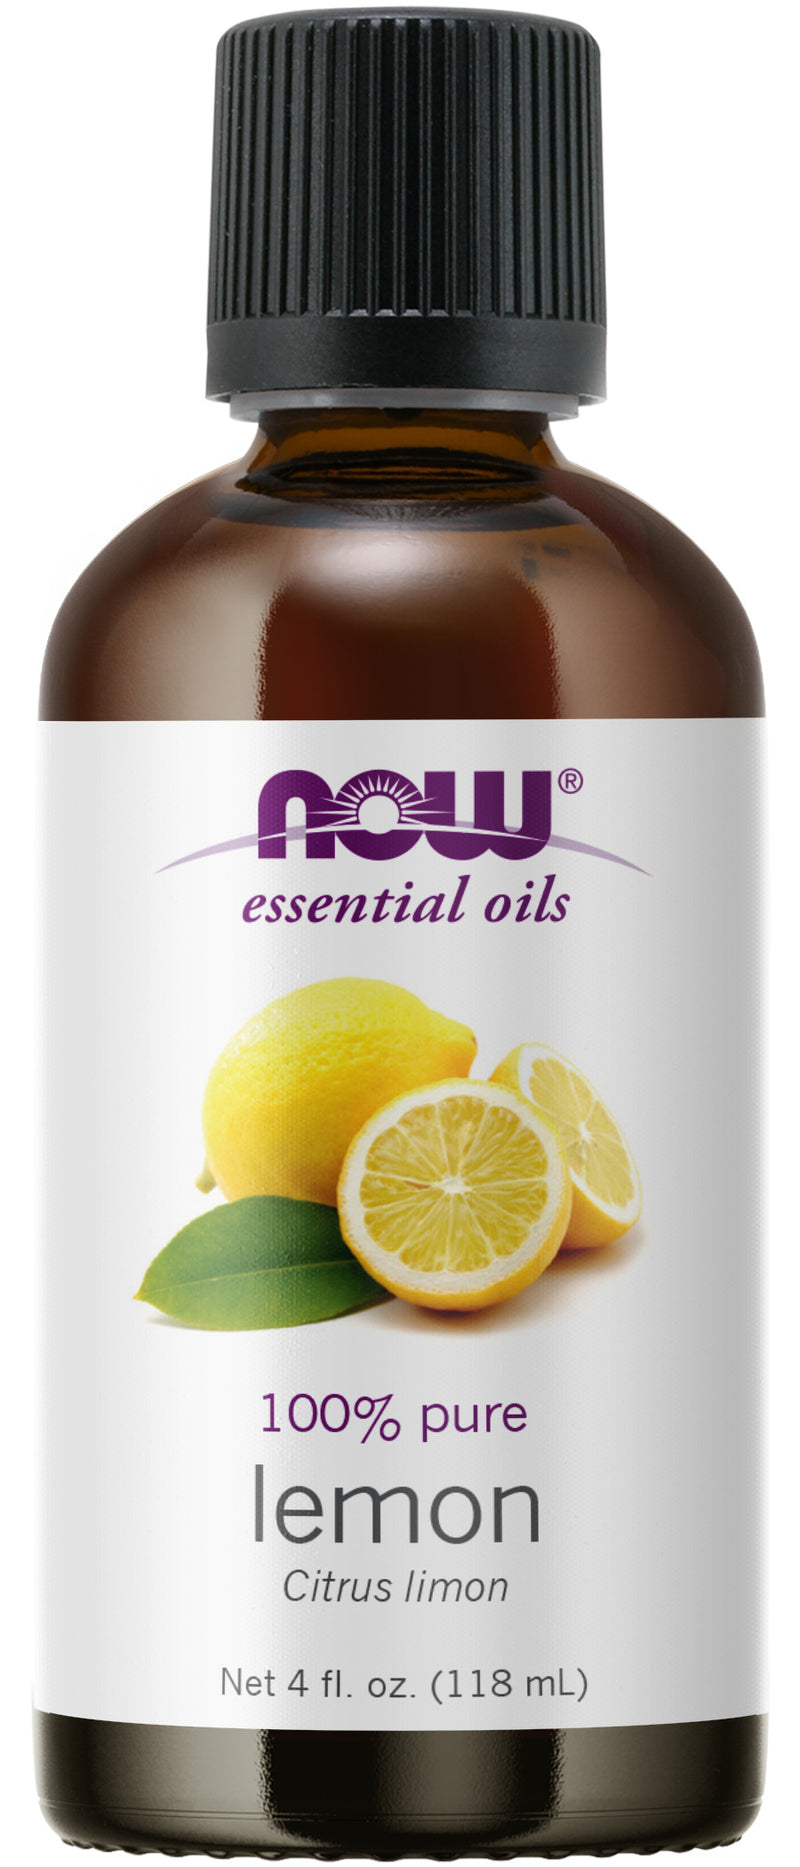 NOW Essential Oils, Lemon Oil, Cheerful Aromatherapy Scent, Cold Pressed, 100% Pure, Vegan, Child Resistant Cap, 4-Ounce